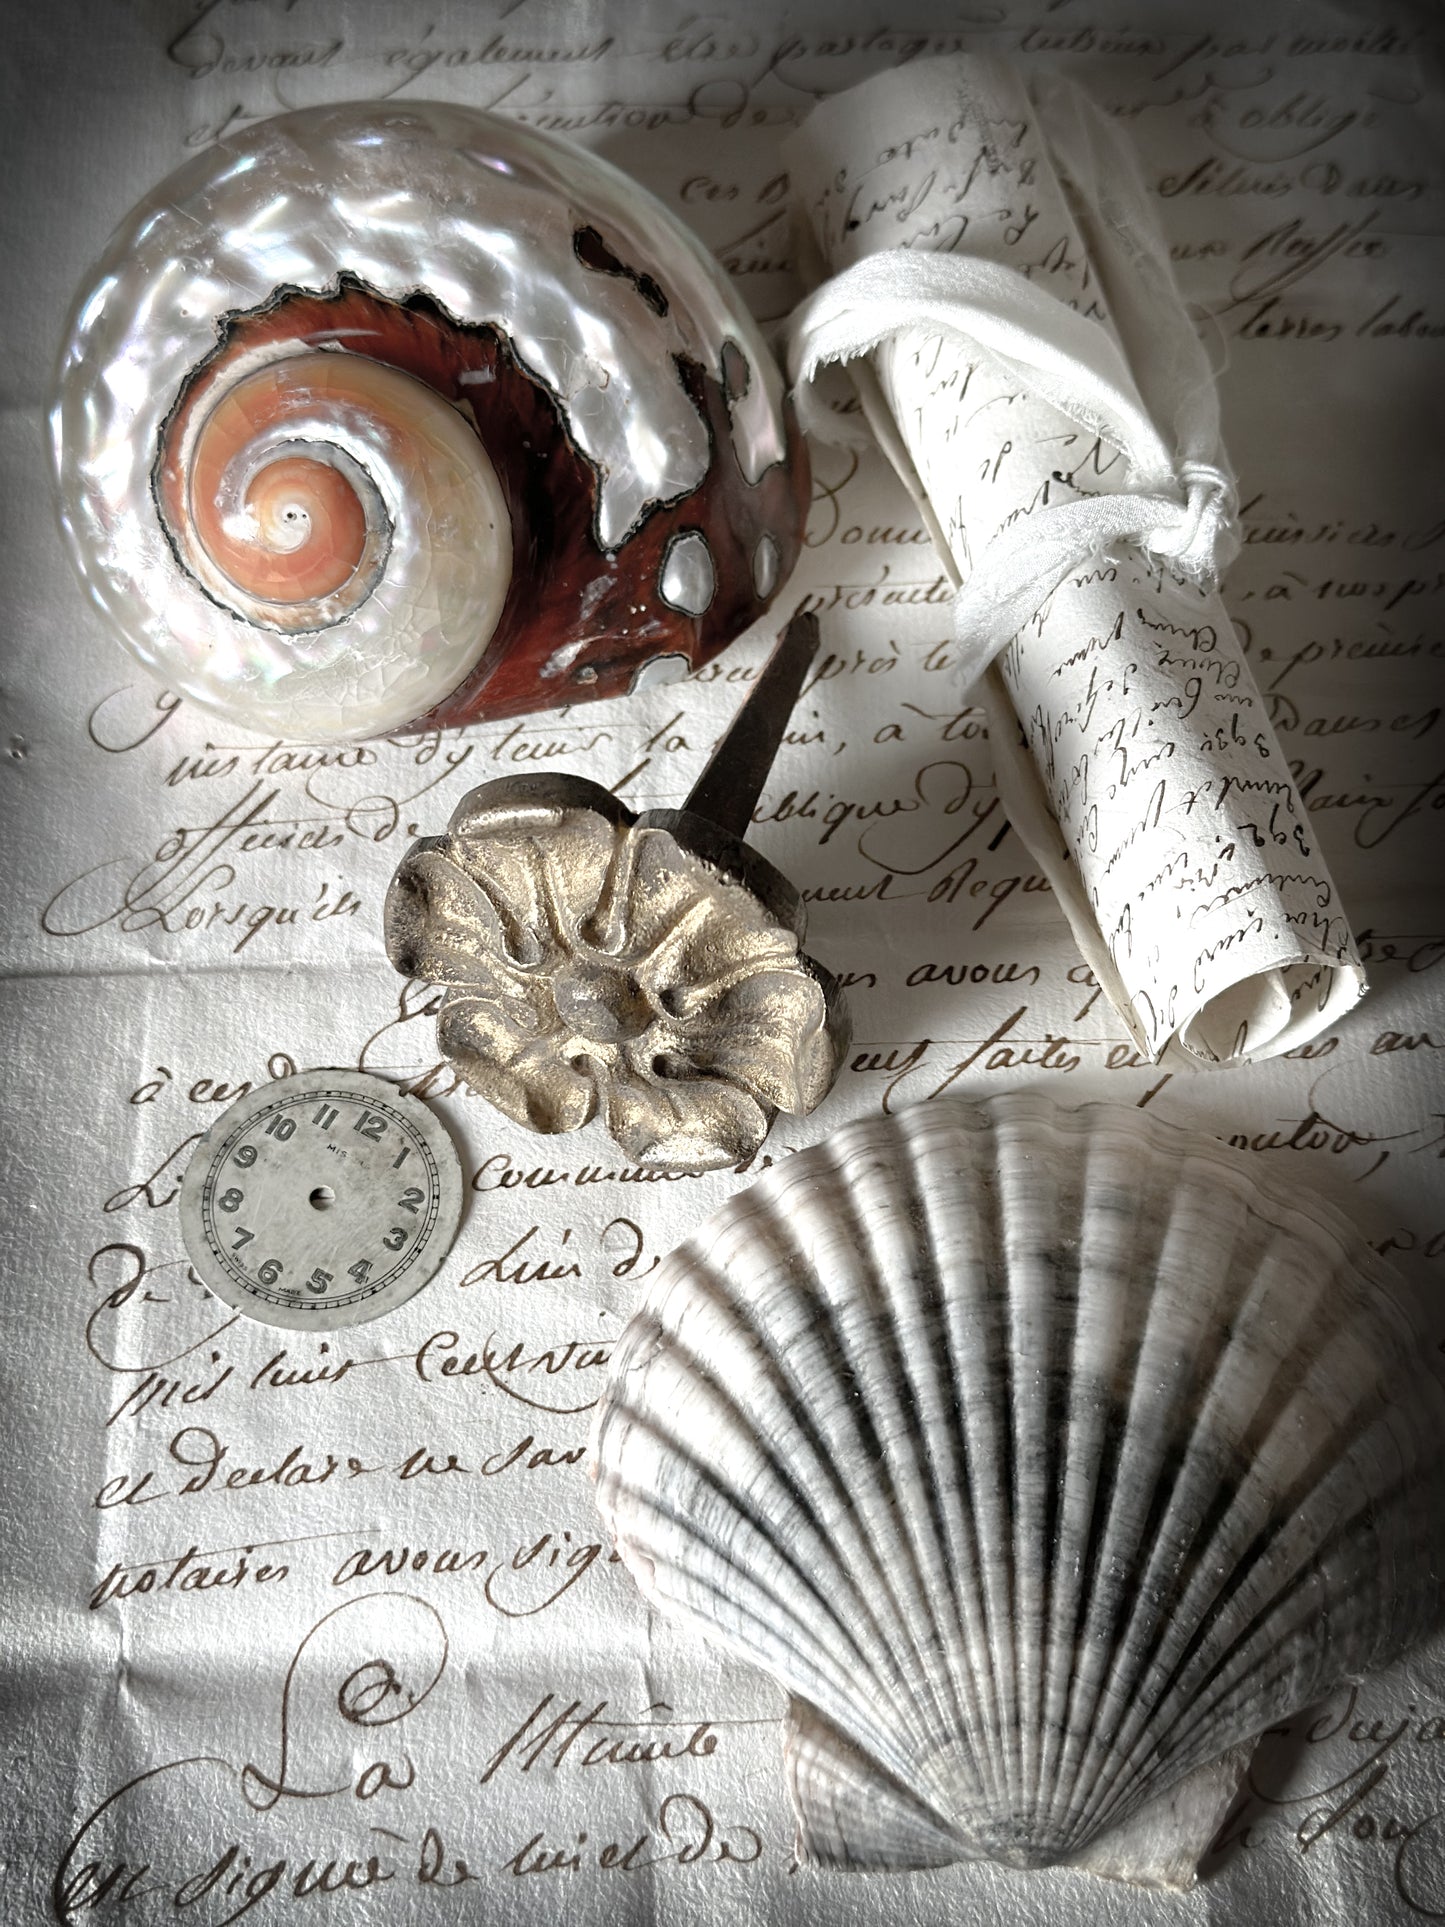 A collection of found objects to fill a glass dome